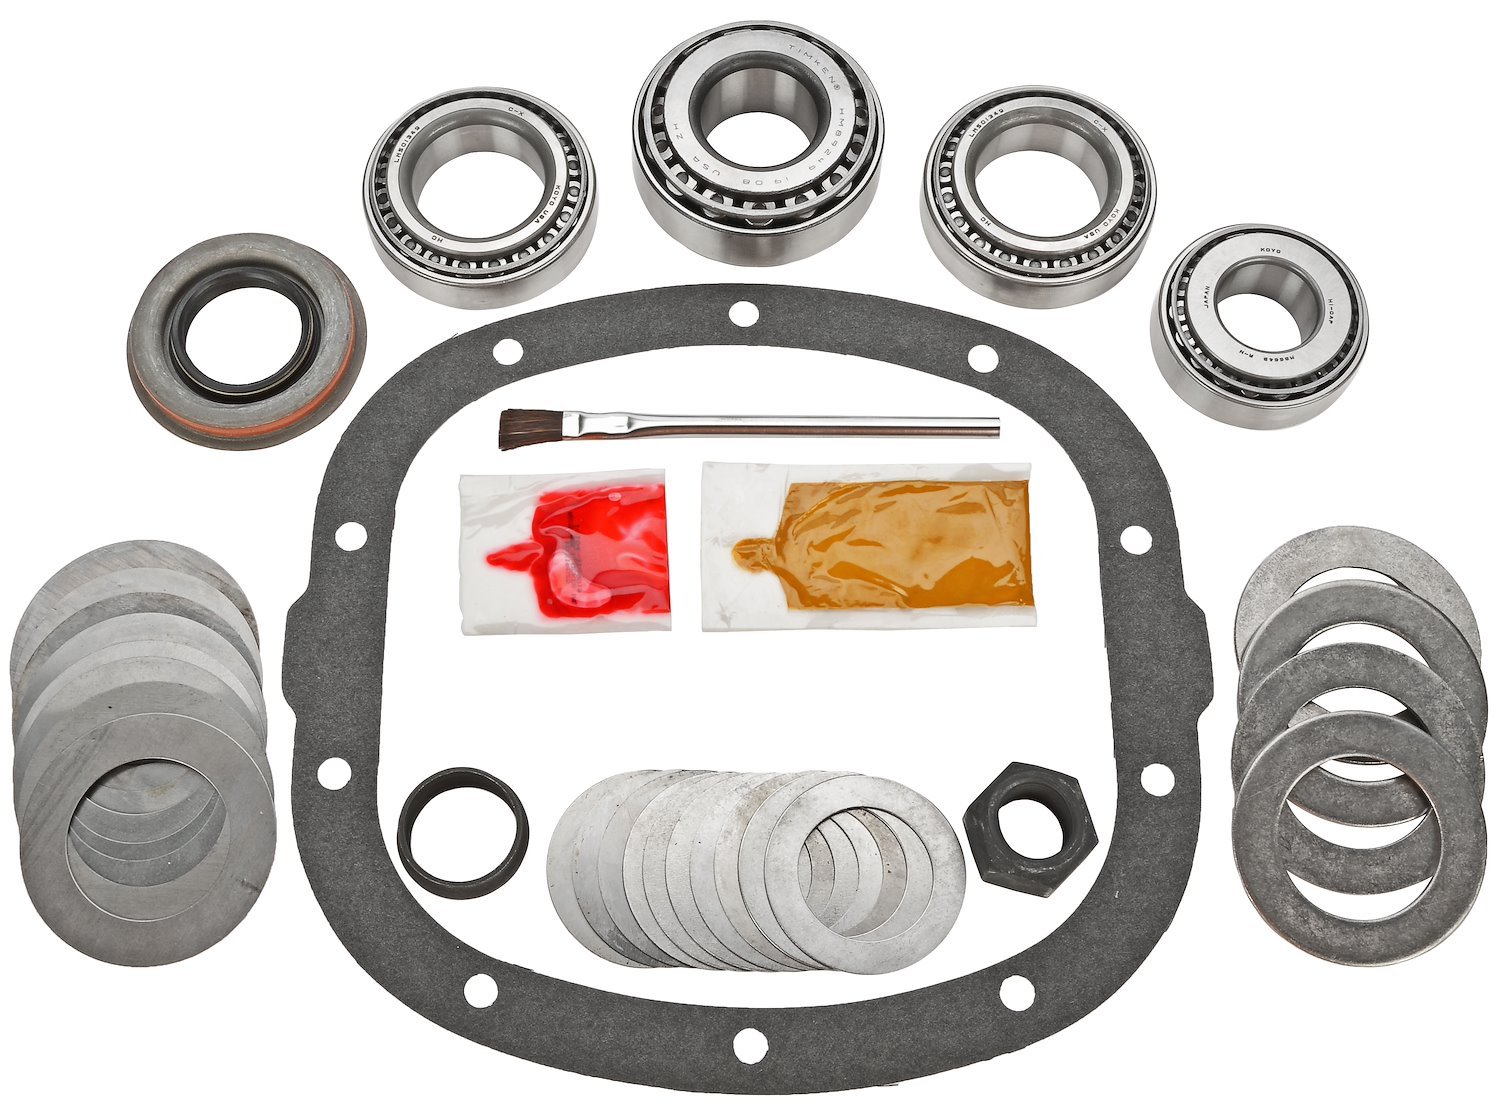 Complete Differential Installation Kit for GM 7.5 in. (10-Bolt) 1982-1998 Car/Truck with 3.125 in. Head Bearing